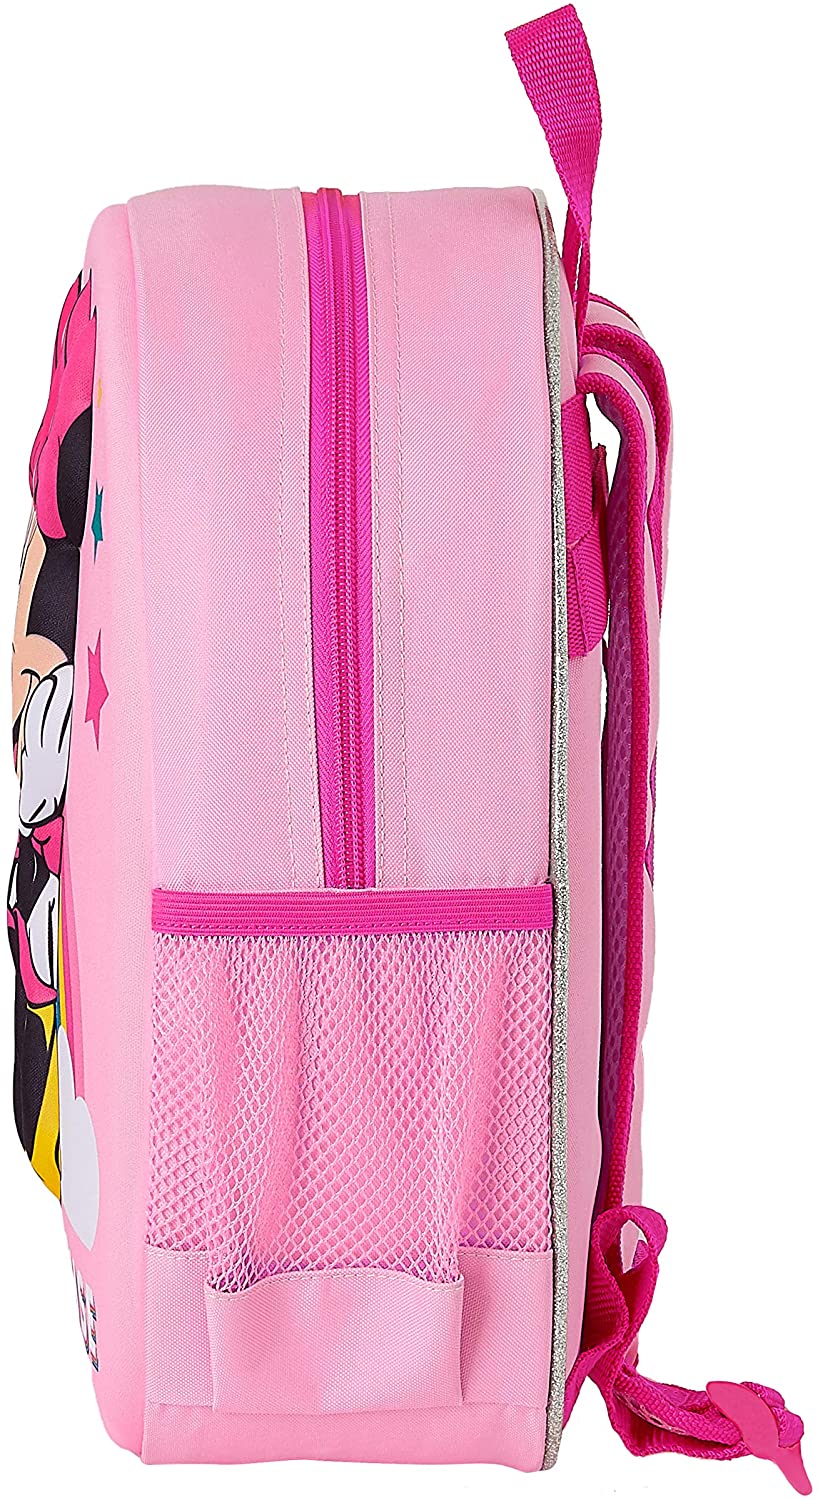 Safta Backpack with 3D Design Adaptable to Minnie Mouse Cart, 270 x 100 x 320 mm